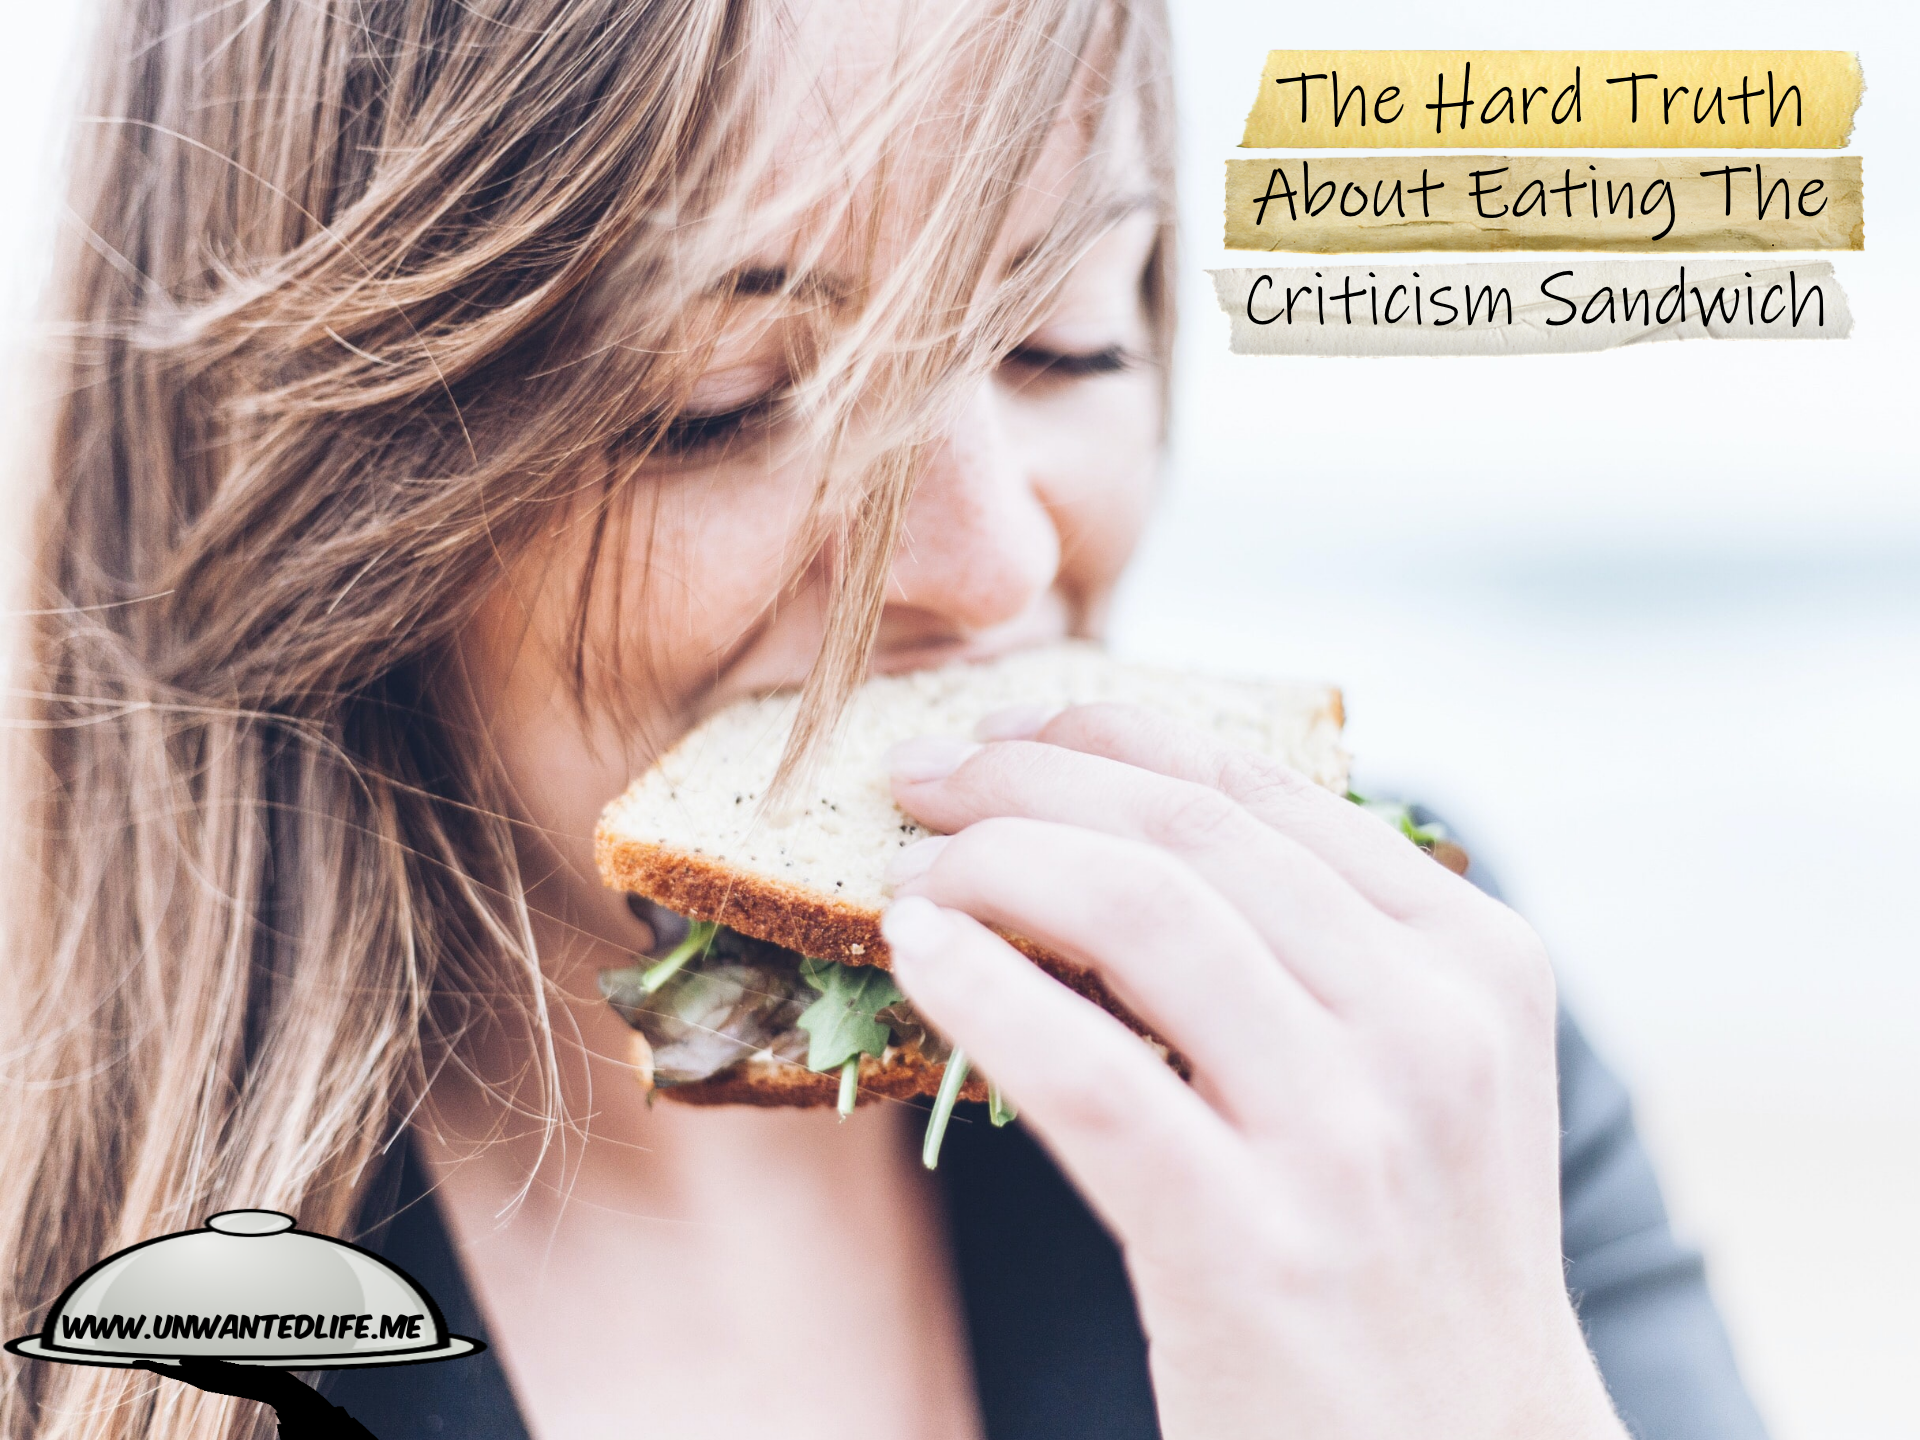 A photo of a white woman eating a sandwich to represent - The Hard Truth About Eating The Criticism Sandwich